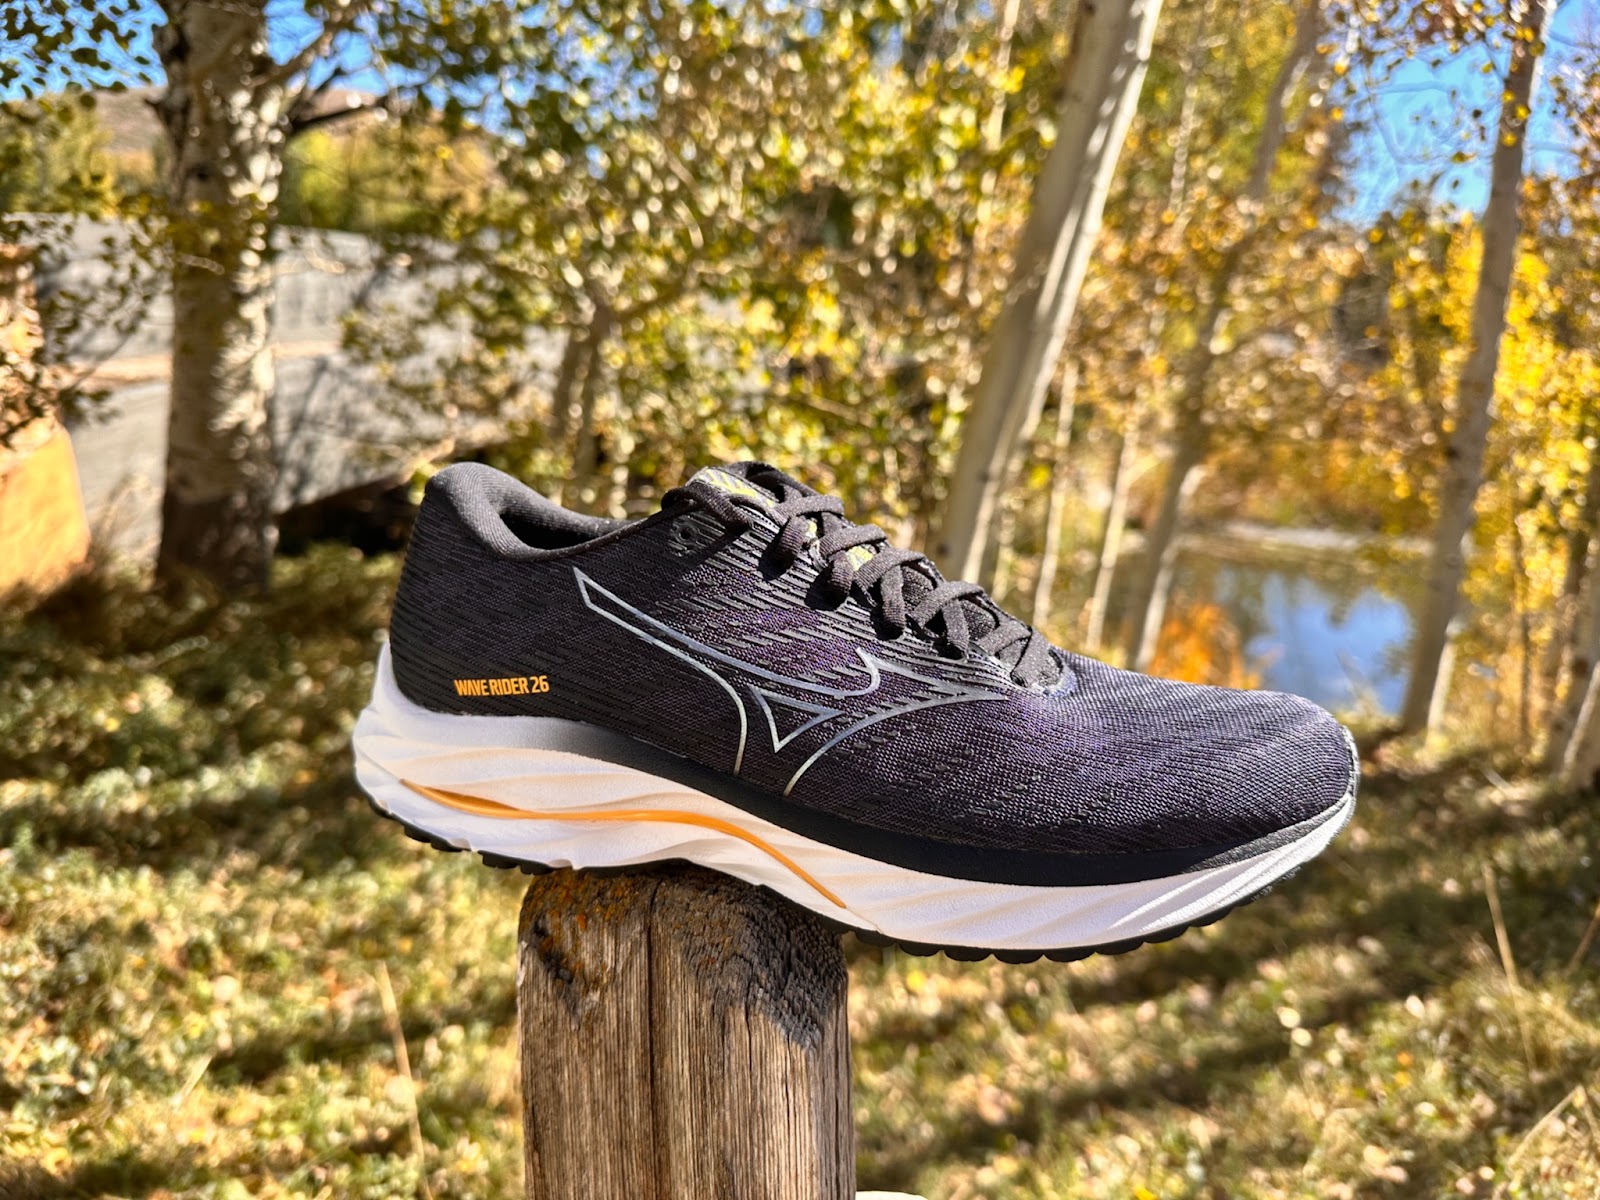 Mizuno Wave Rider 26 Review: Great Bounce and Stability